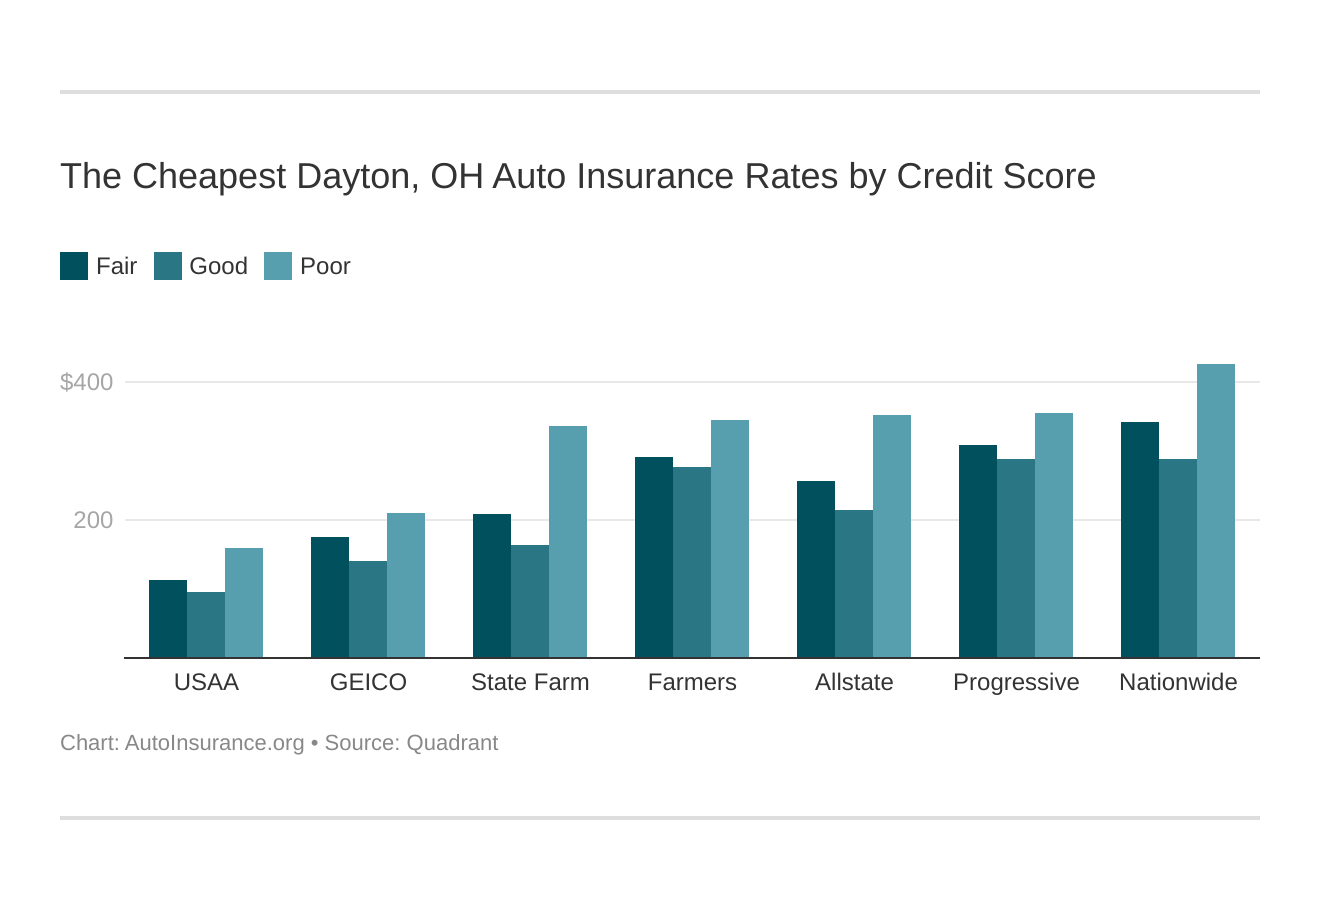 The Cheapest Dayton, OH Auto Insurance Rates by Credit Score